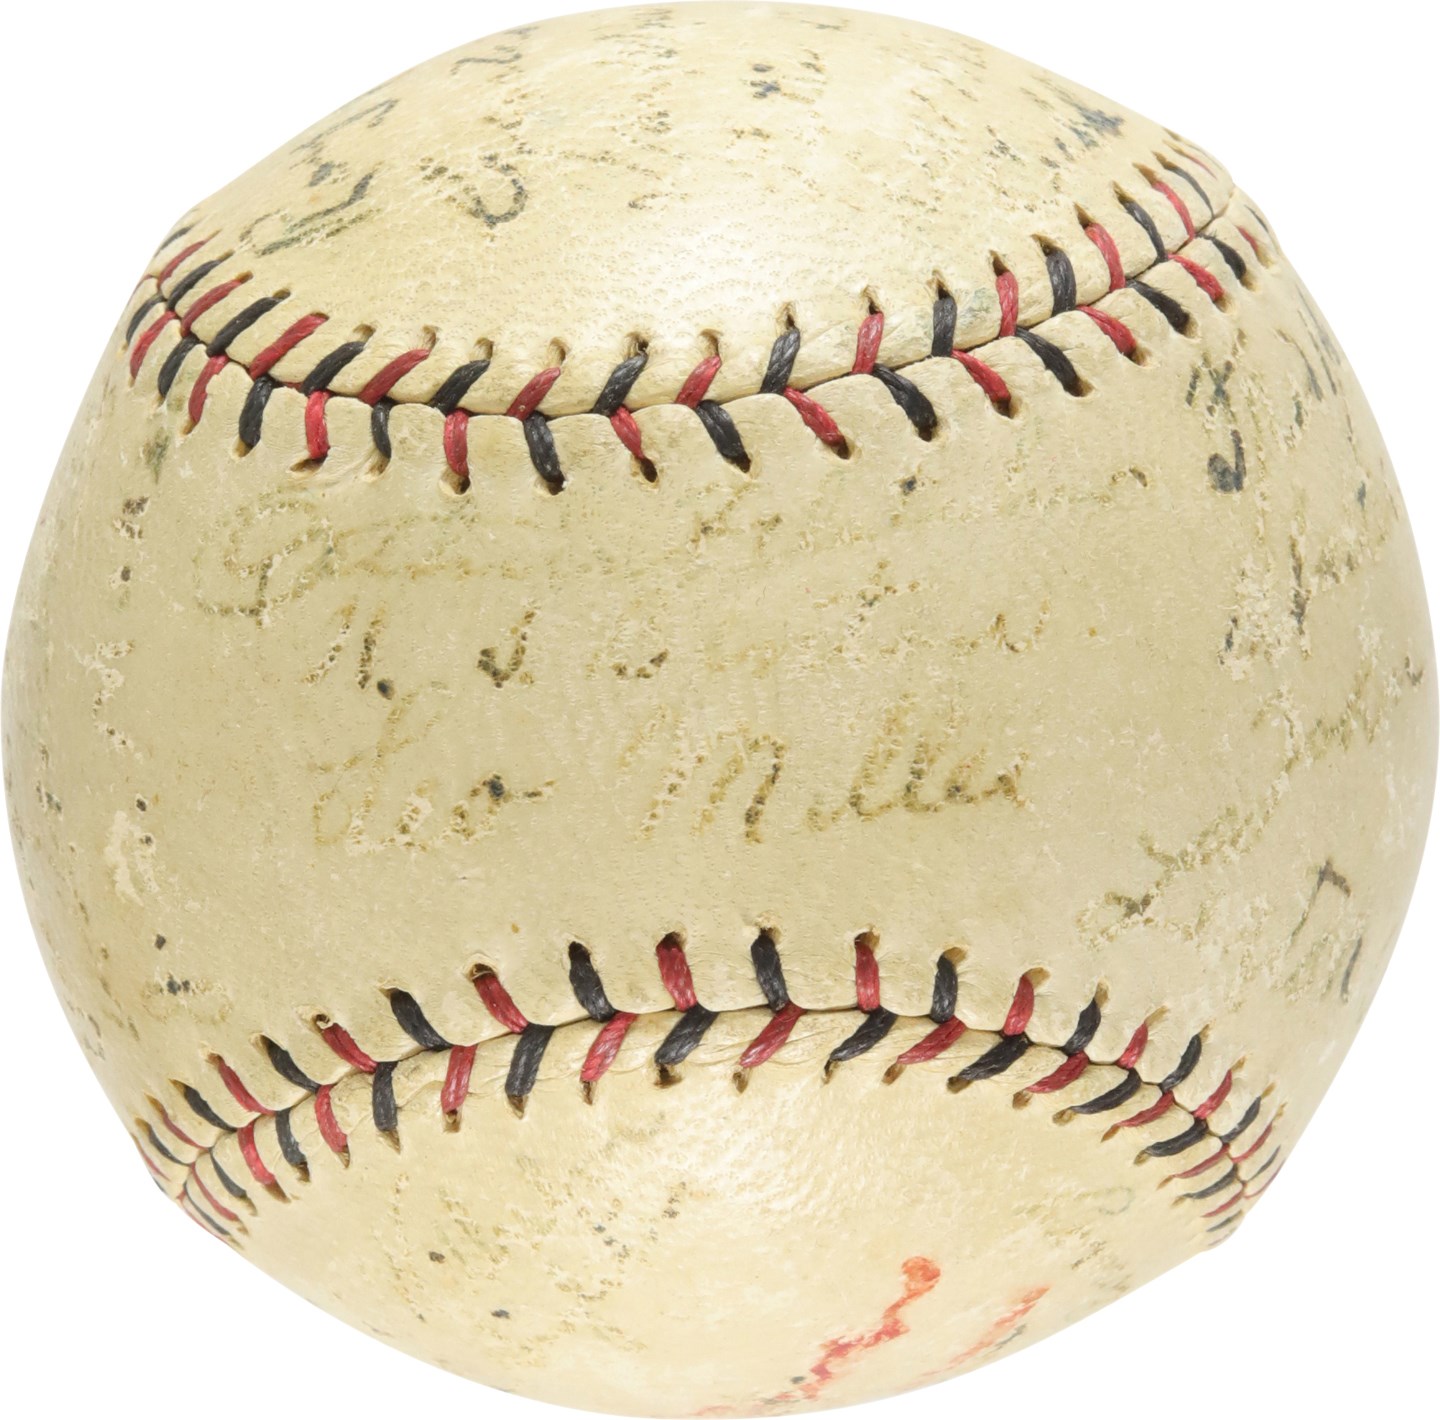 - 1922 Philadelphia Phillies Team-Signed Baseball (ex-Jimmy Ring Collection)